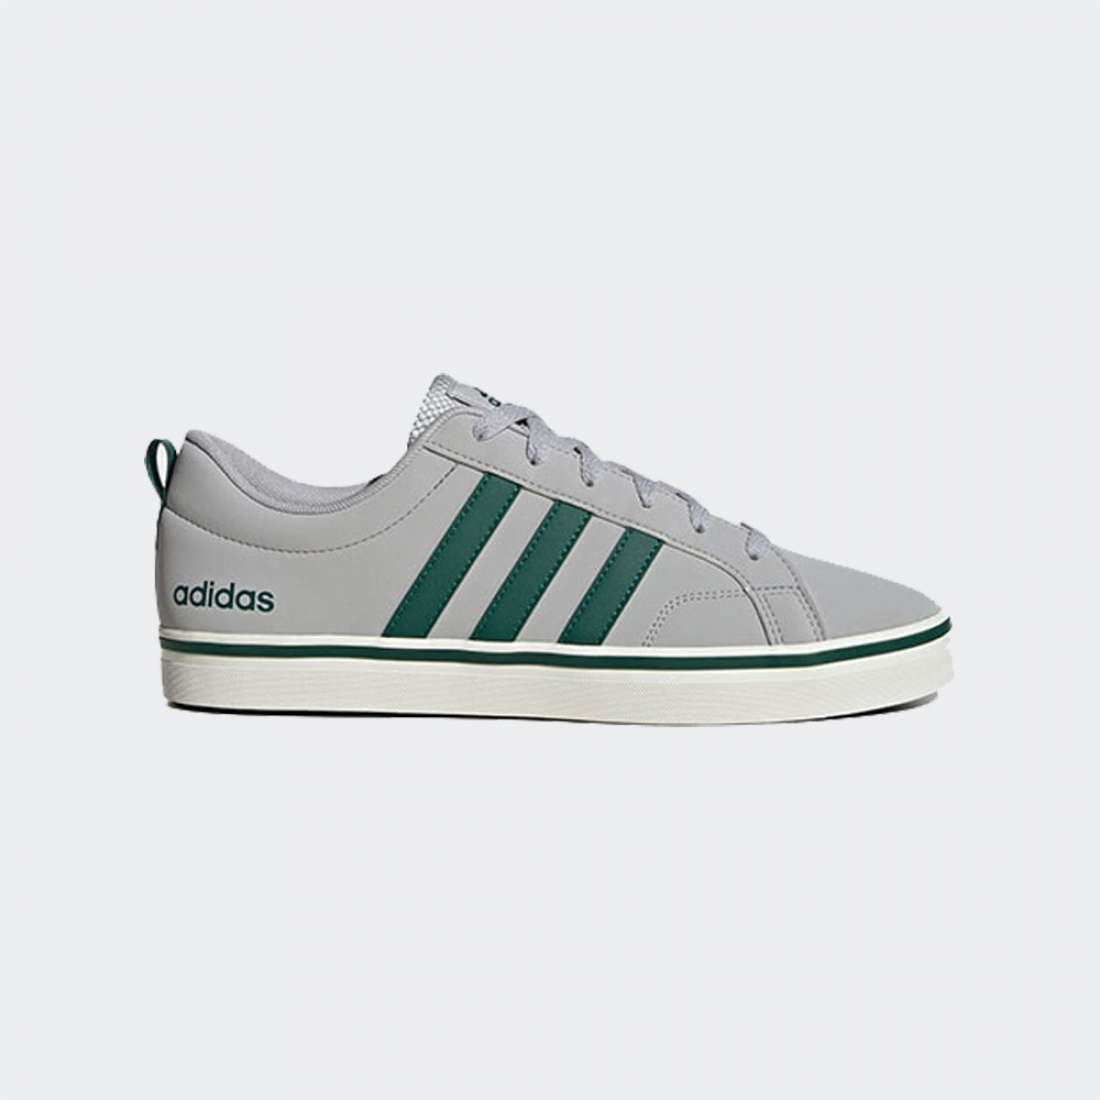 ADIDAS VS PACE 2.0 GRETWO/GREEN/WHITE